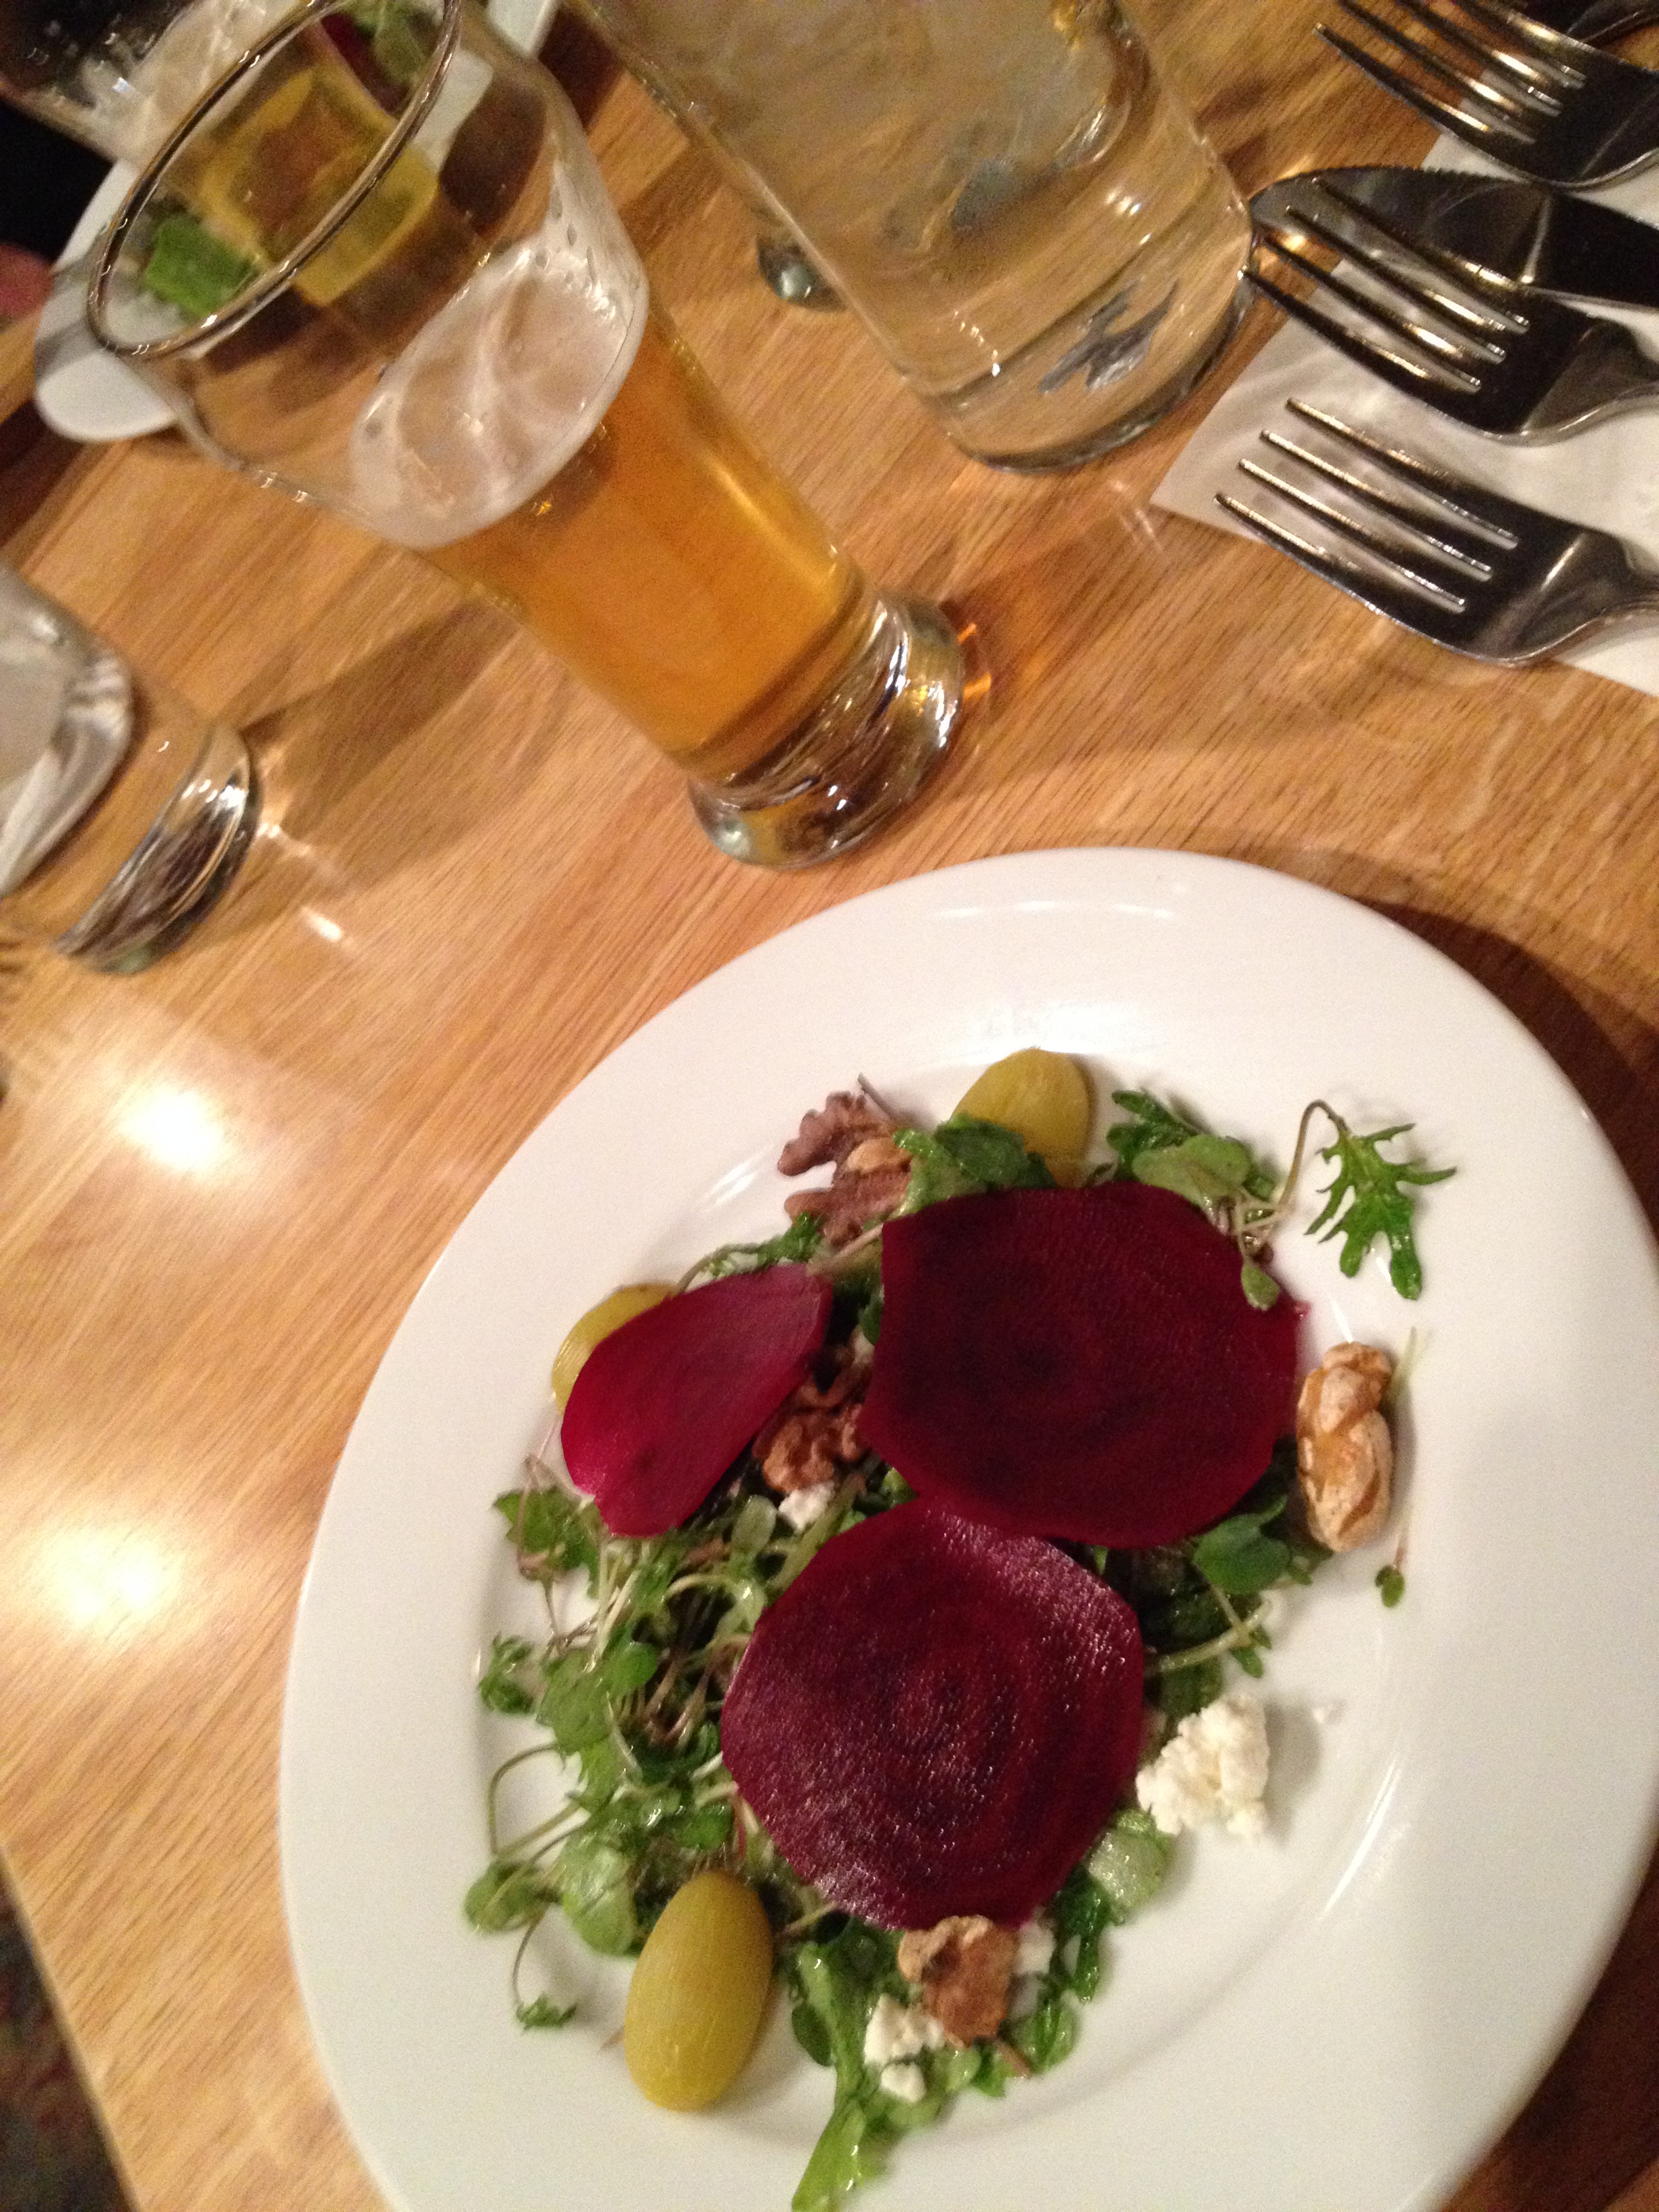 Figure 2. Course #2 was baby kale, goat cheese, shaved beets, ale poached grapes, toasted walnuts paired with Palesner (light bodied).